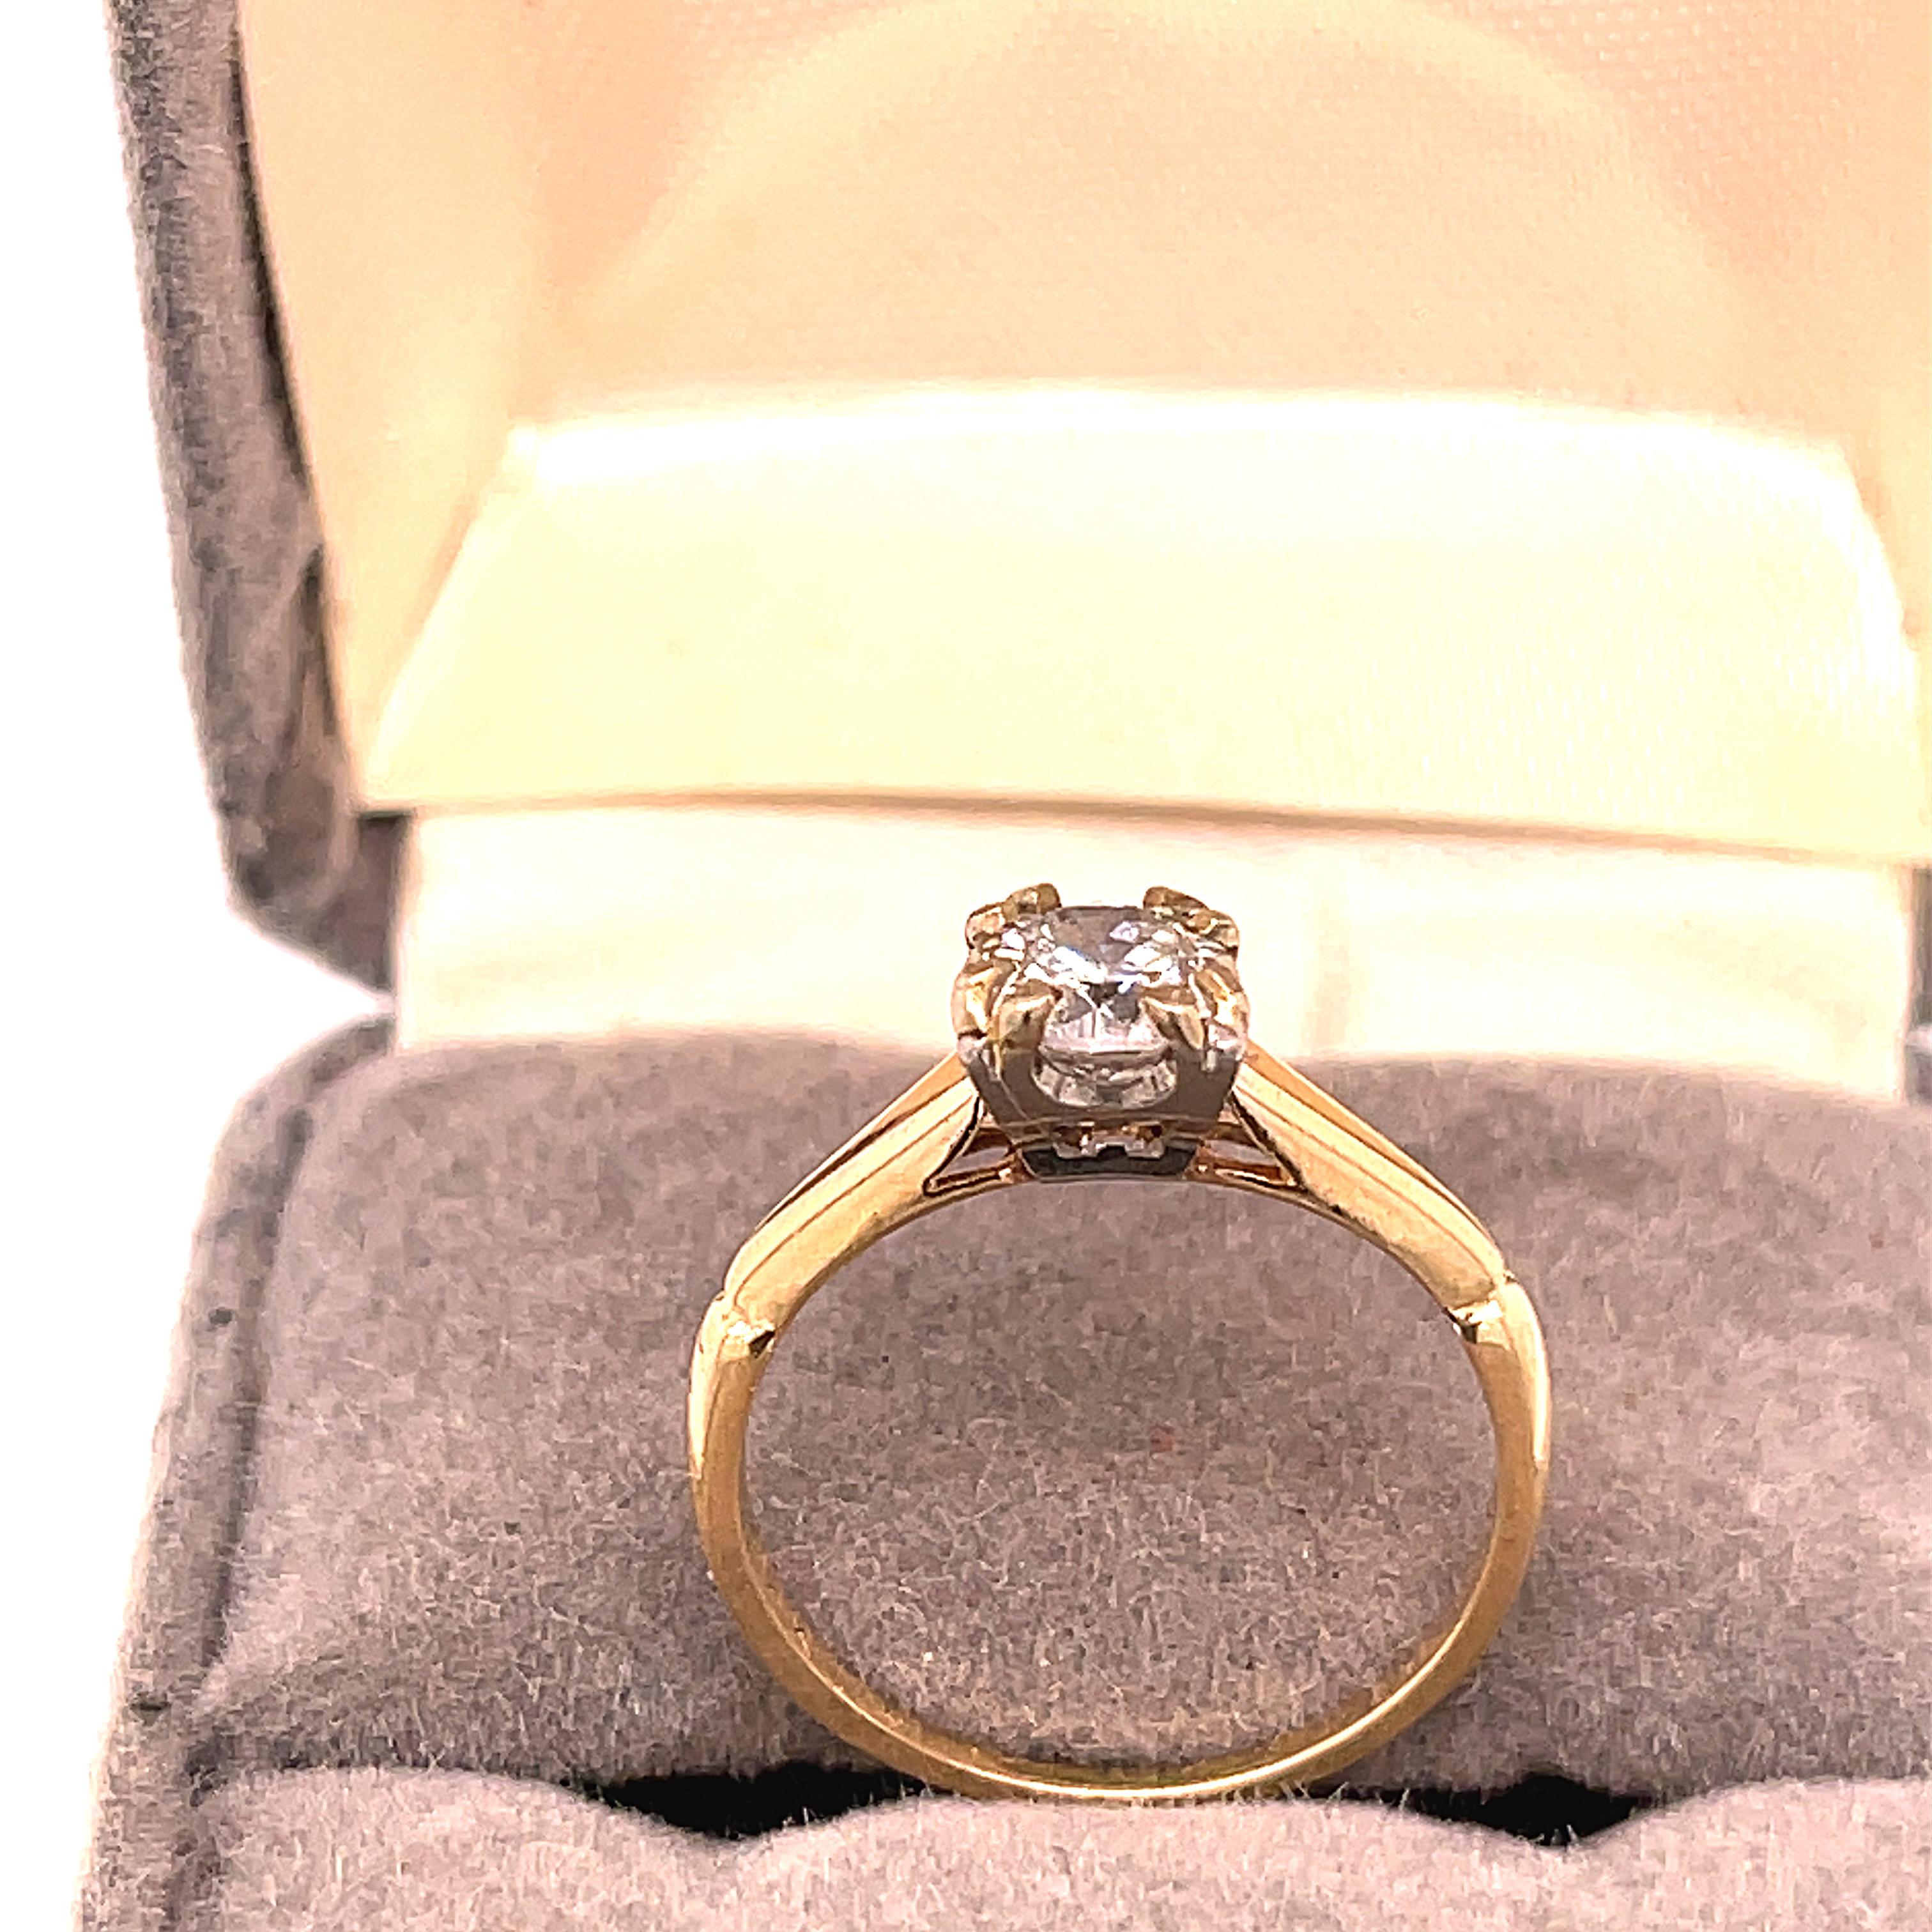 Antique 14 Karat Gold & 0.73 Ct. European Cut Diamond Solitaire Ring In Good Condition For Sale In Philadelphia, PA